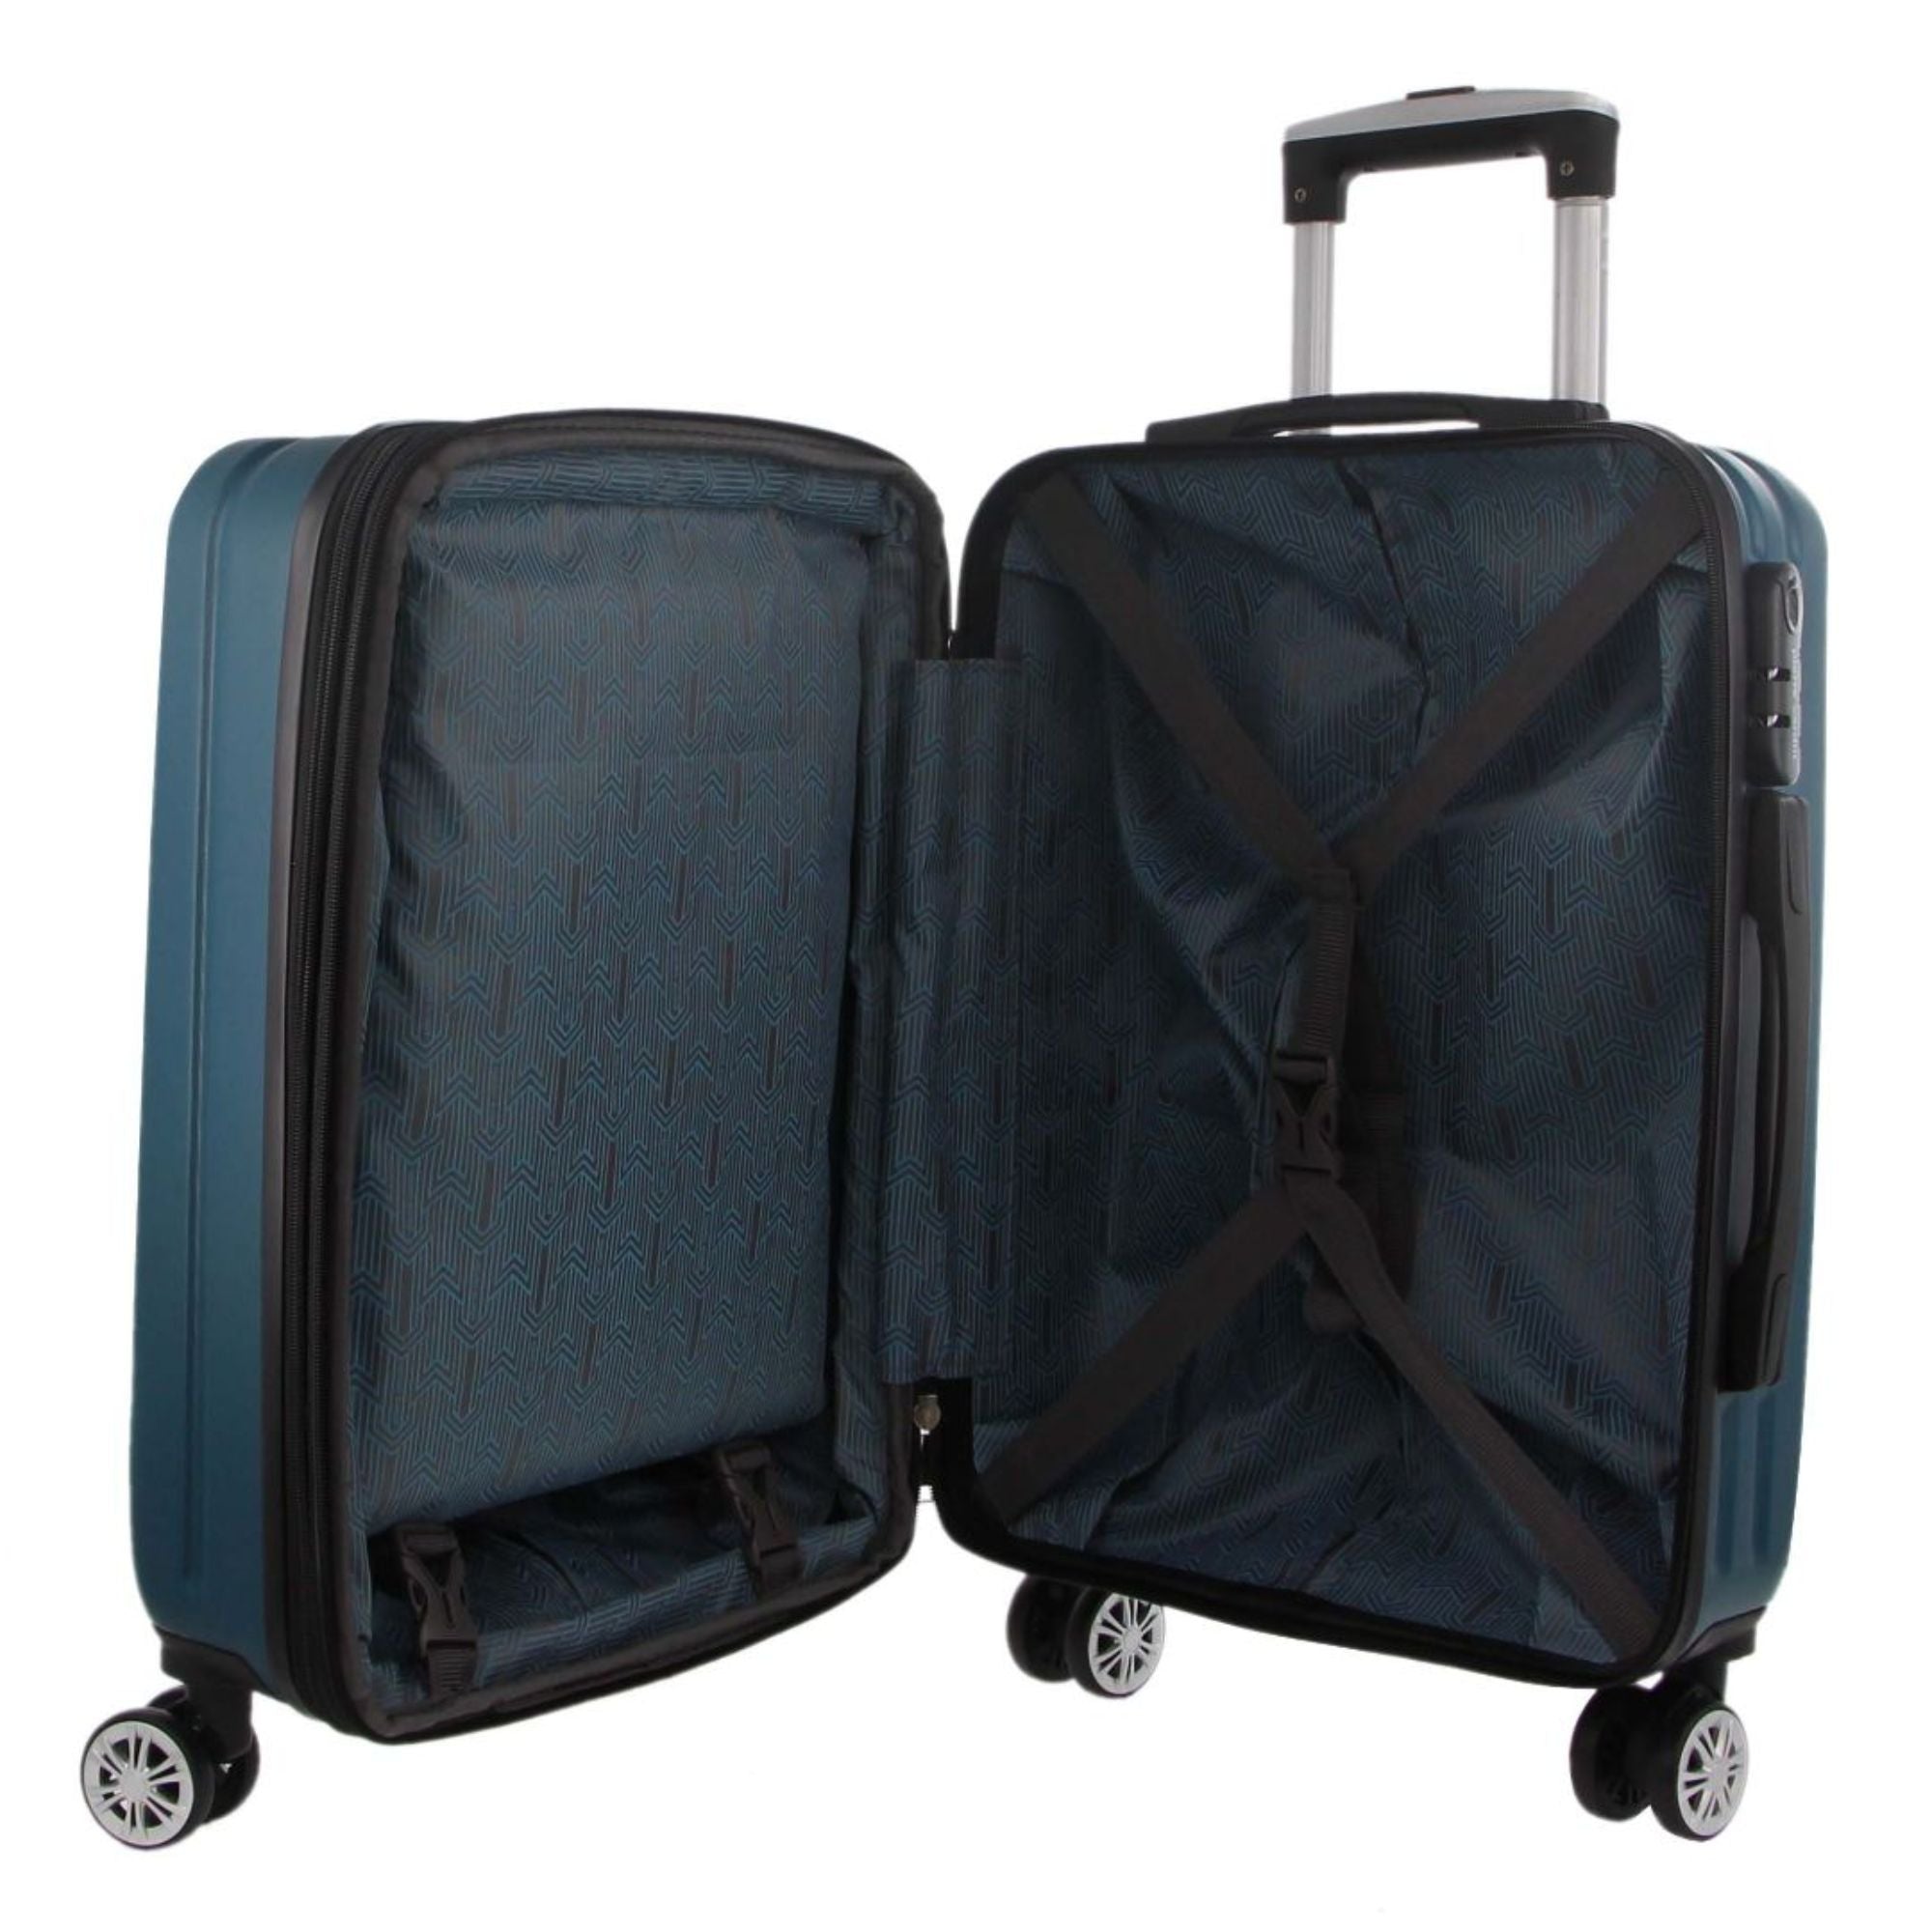 Pierre Cardin - PC3249 Small Hard Suitcase - Teal - 0